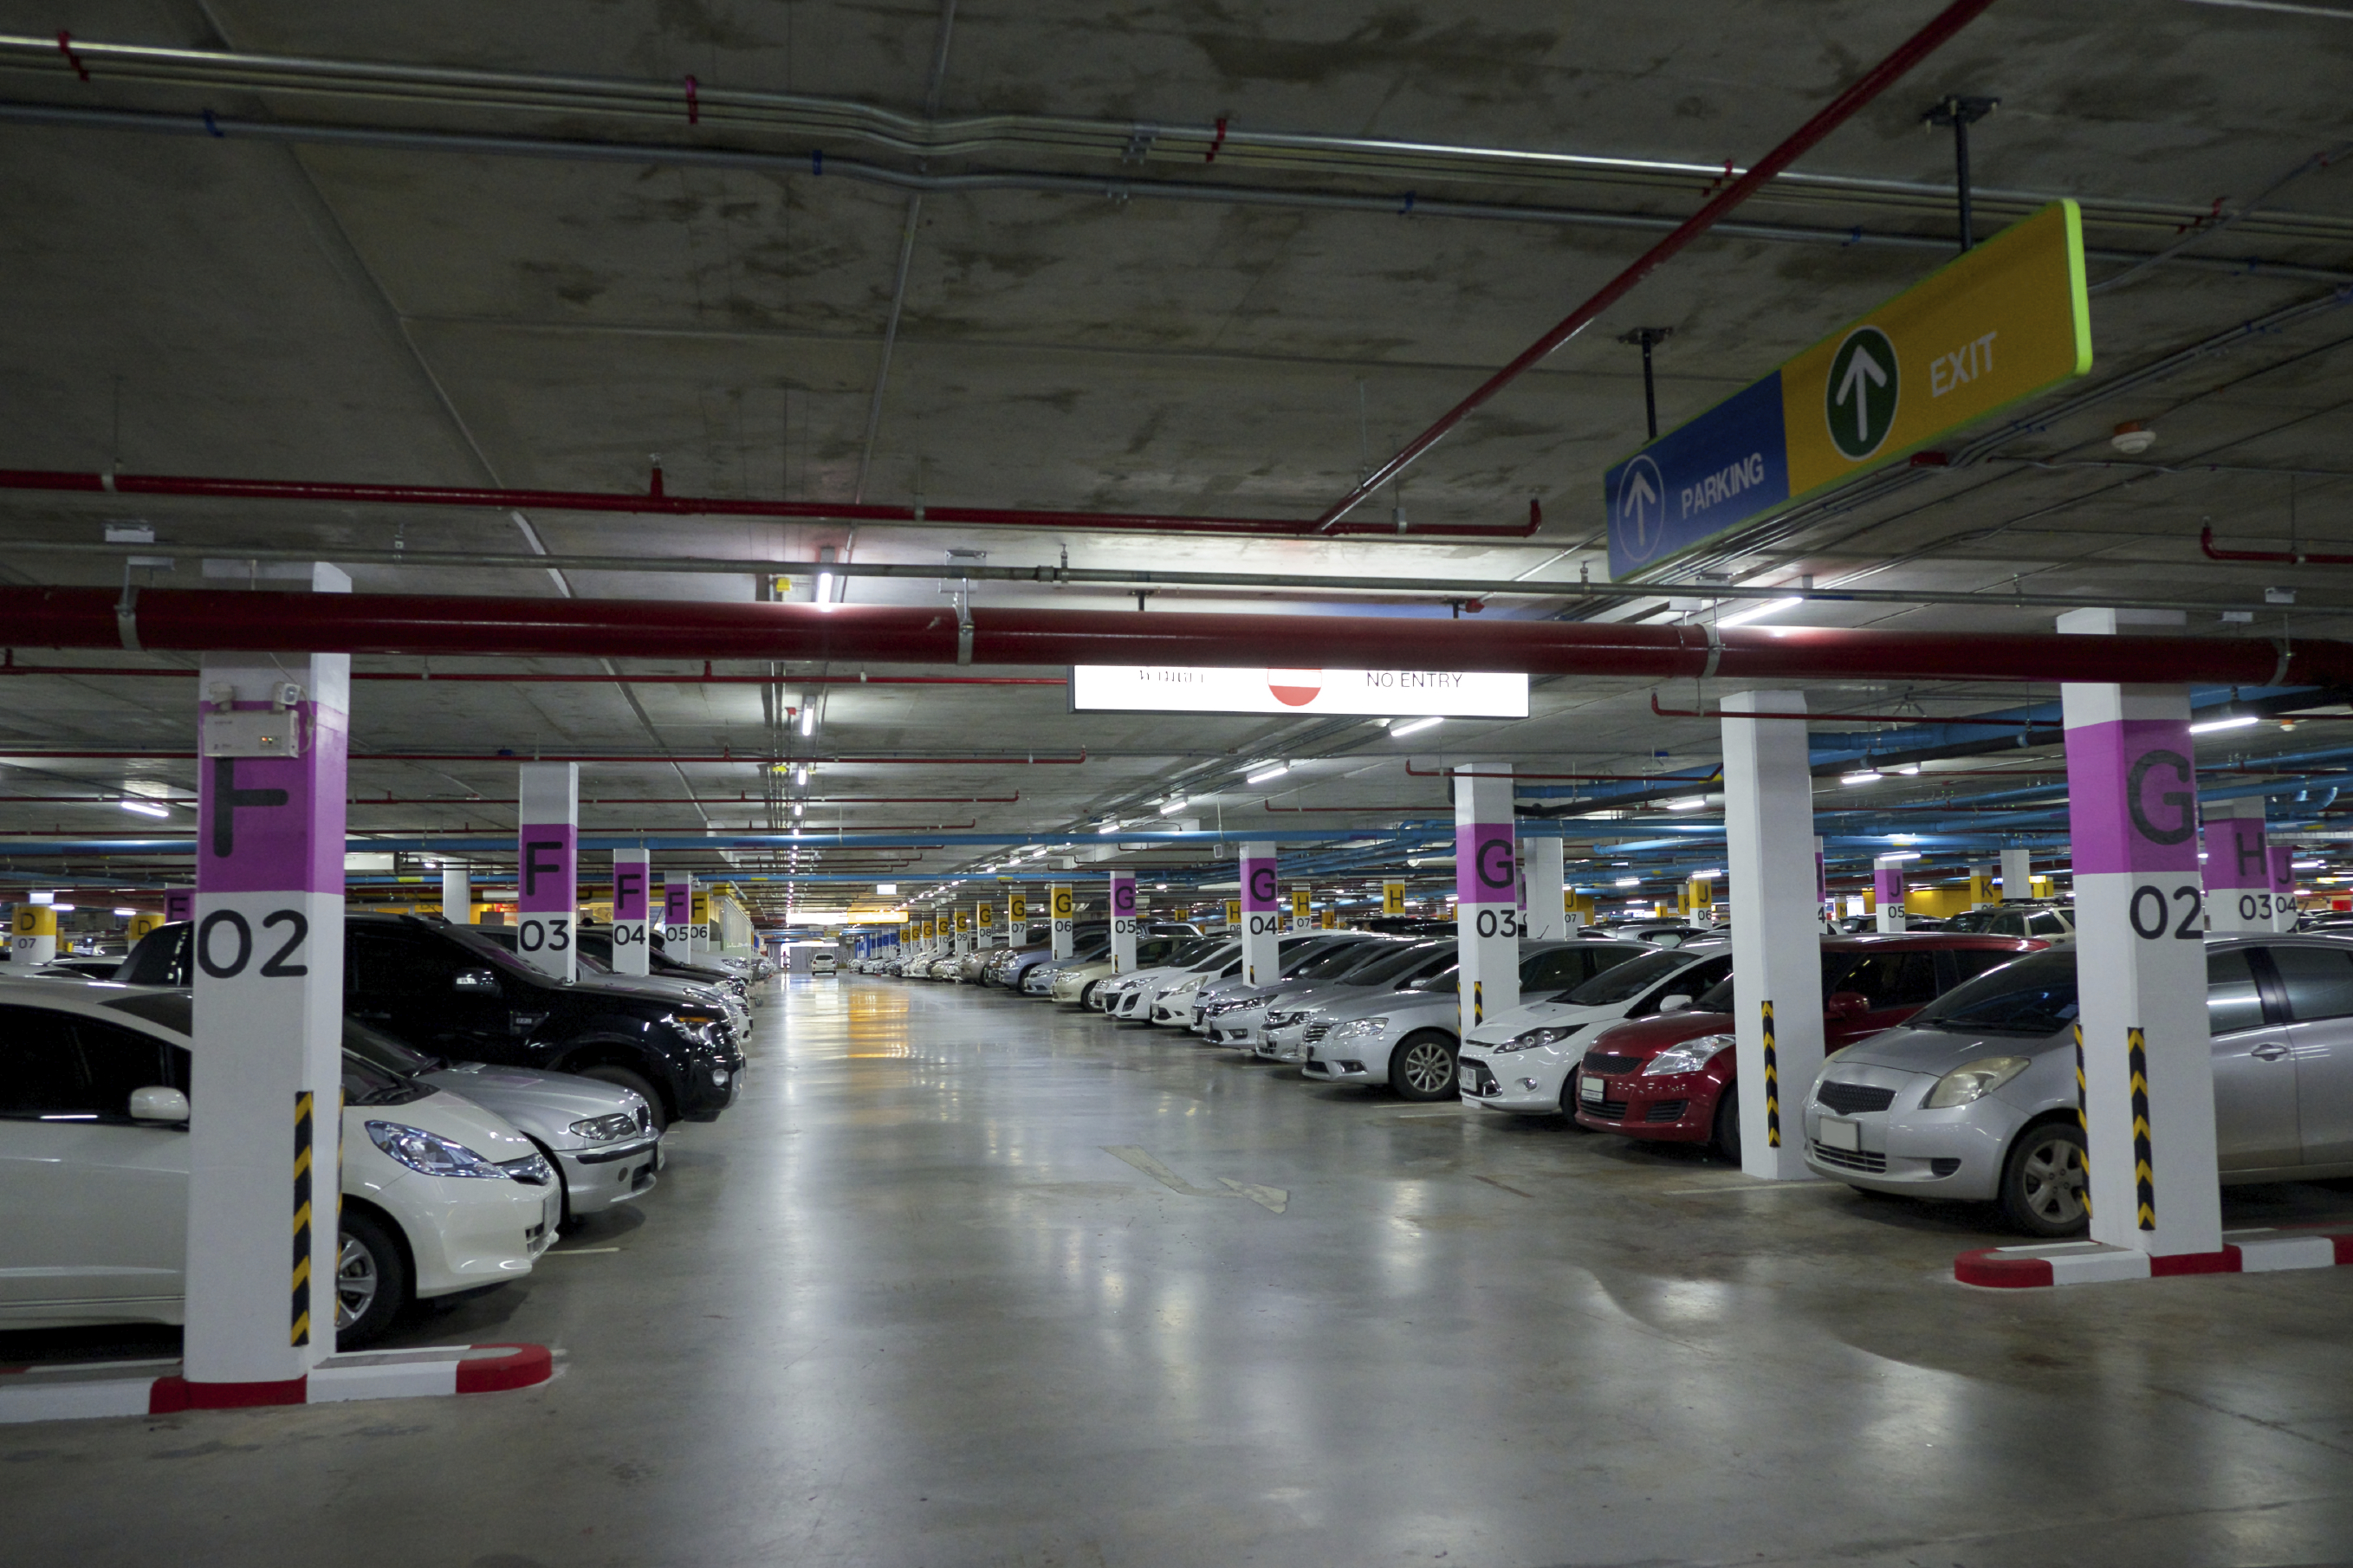 APCOA Parking has taken over the operation of the Printworks Manchester car park